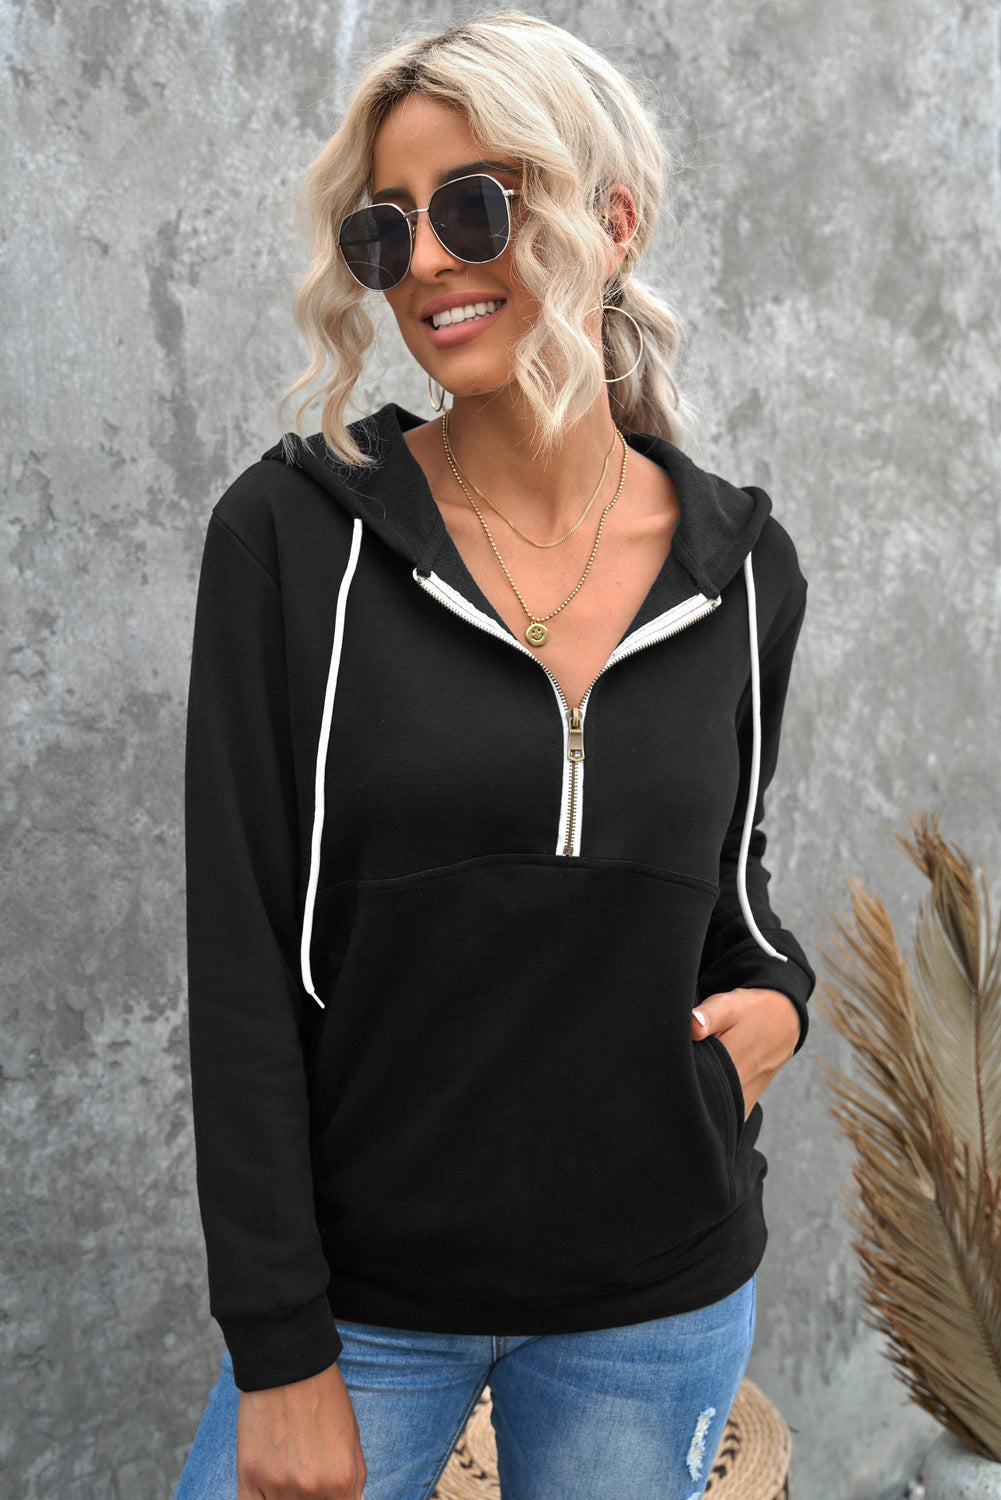 Half-Zip Drawstring Hoodie with Pockets - Black / S - Women’s Clothing & Accessories - Shirts & Tops - 5 - 2024